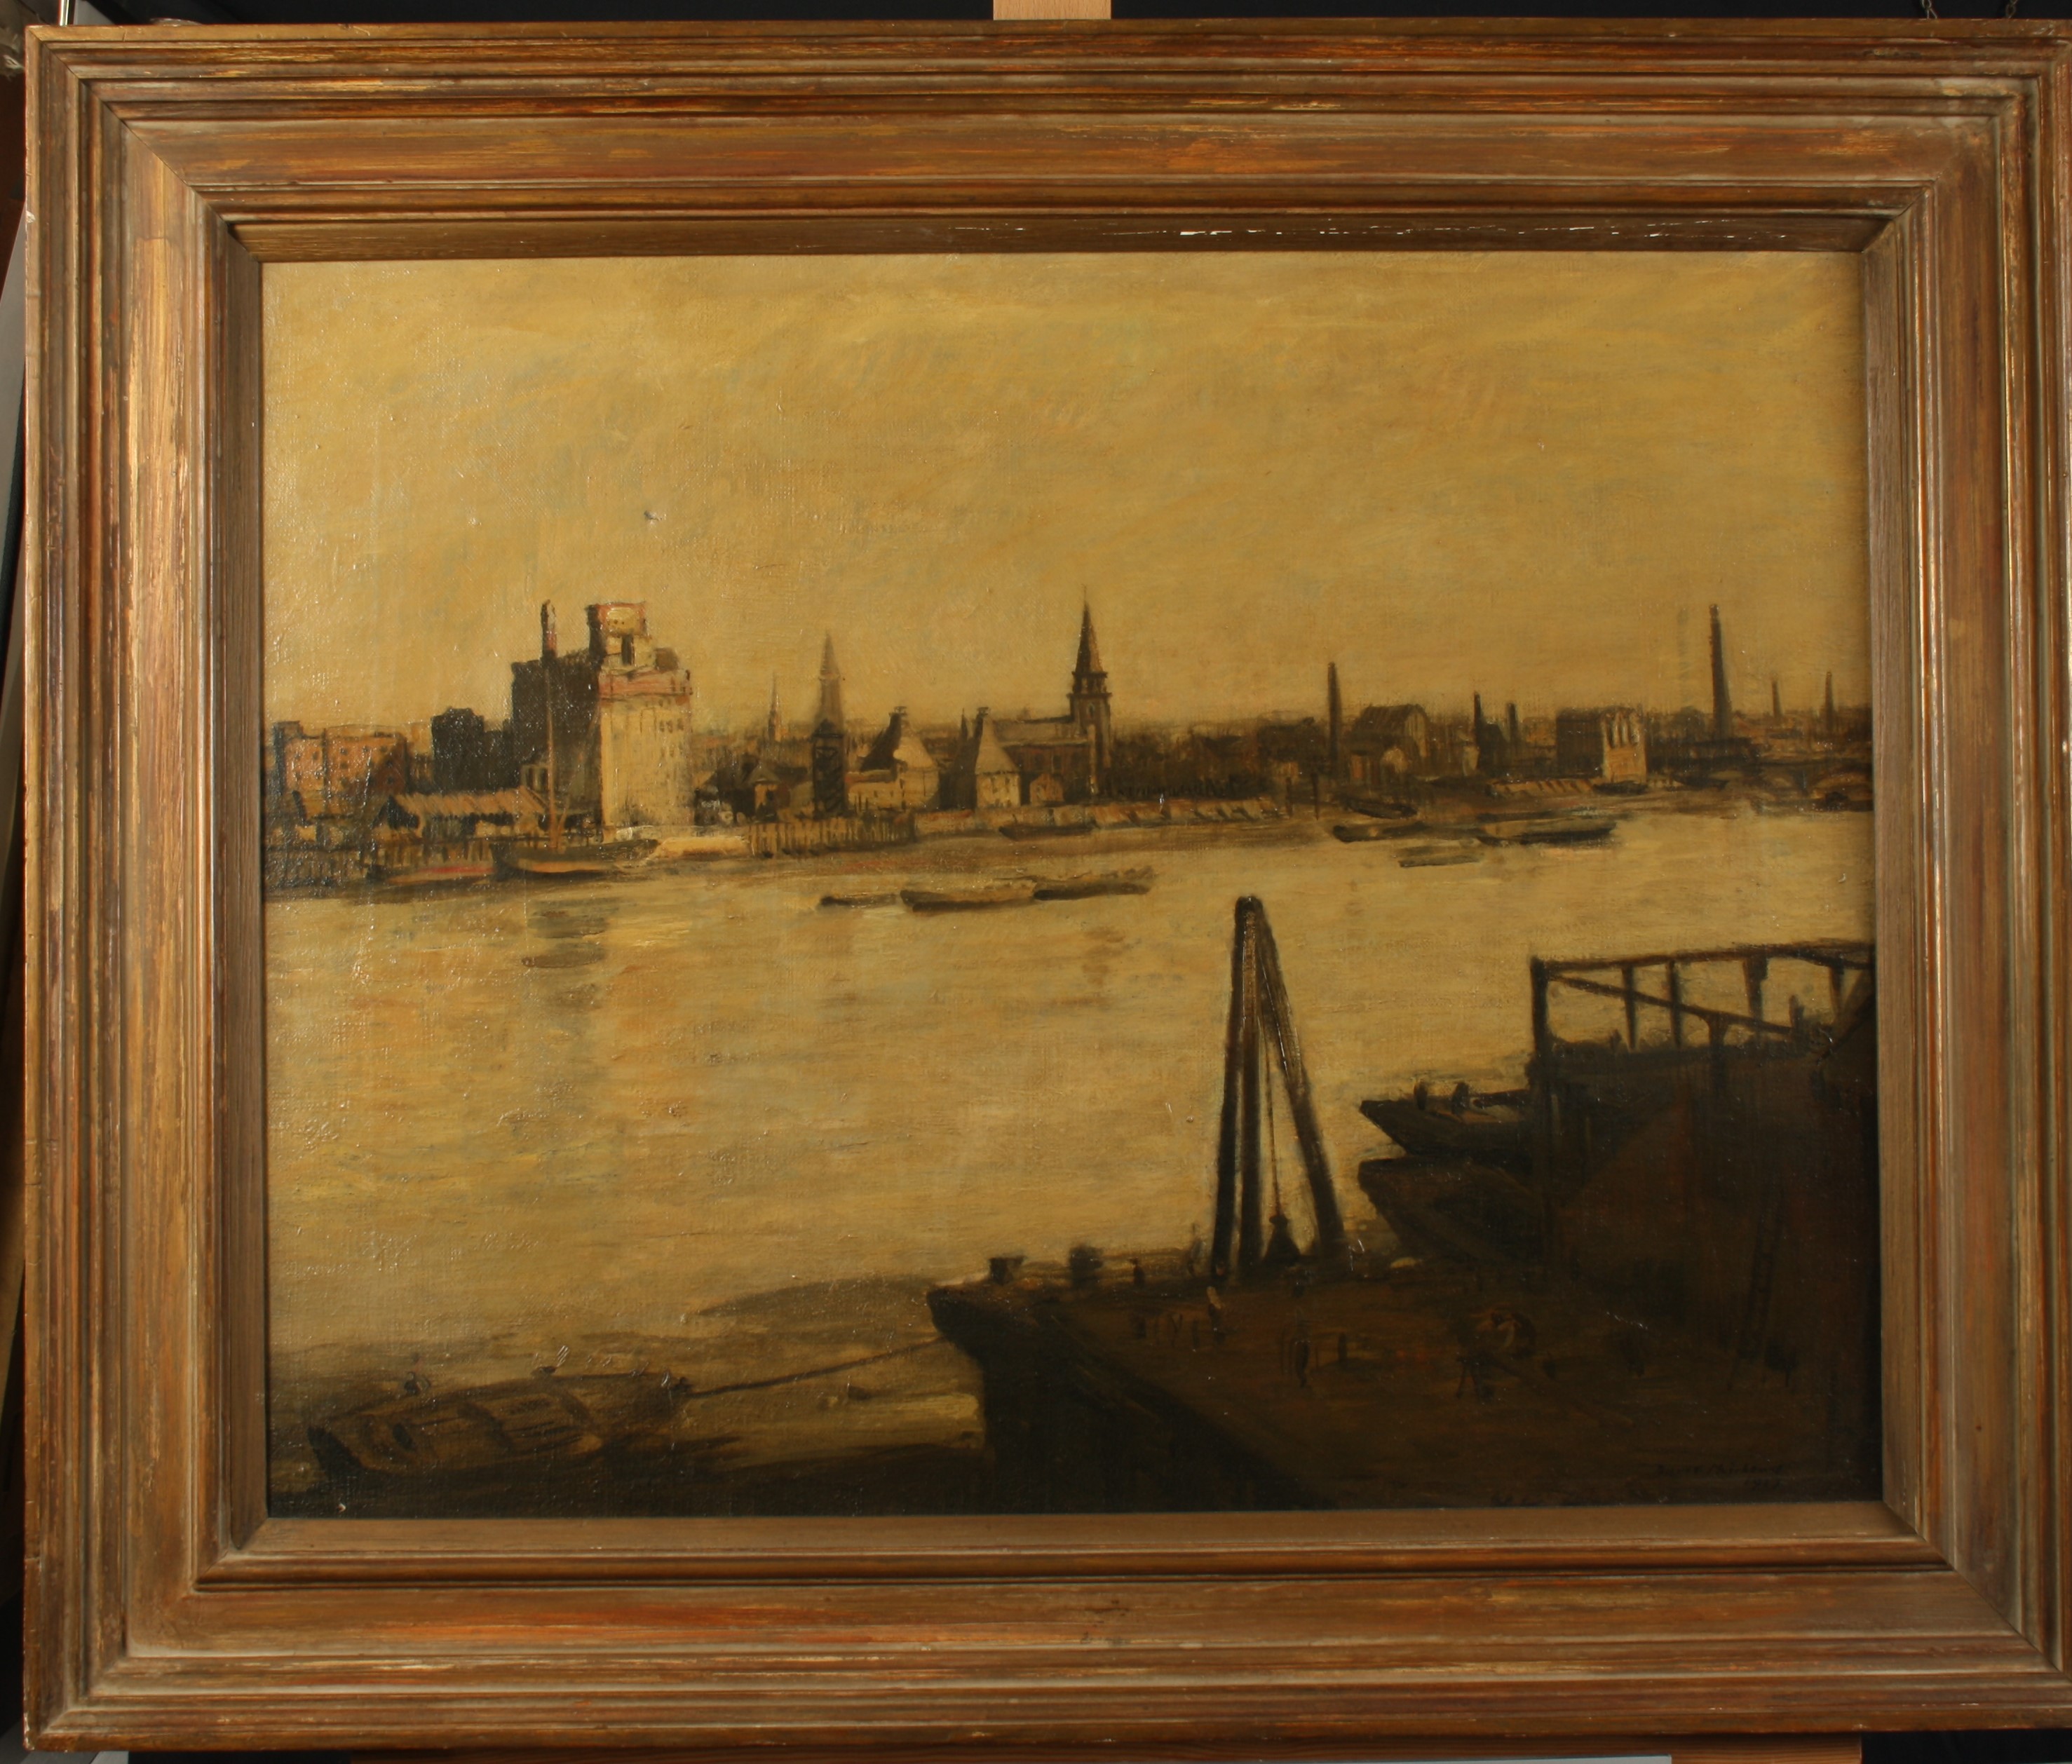 David Thomson MUIRHEAD (1867-1930) Battersea and St Mary's Church from Chelsea Oil on canvas - Image 2 of 2